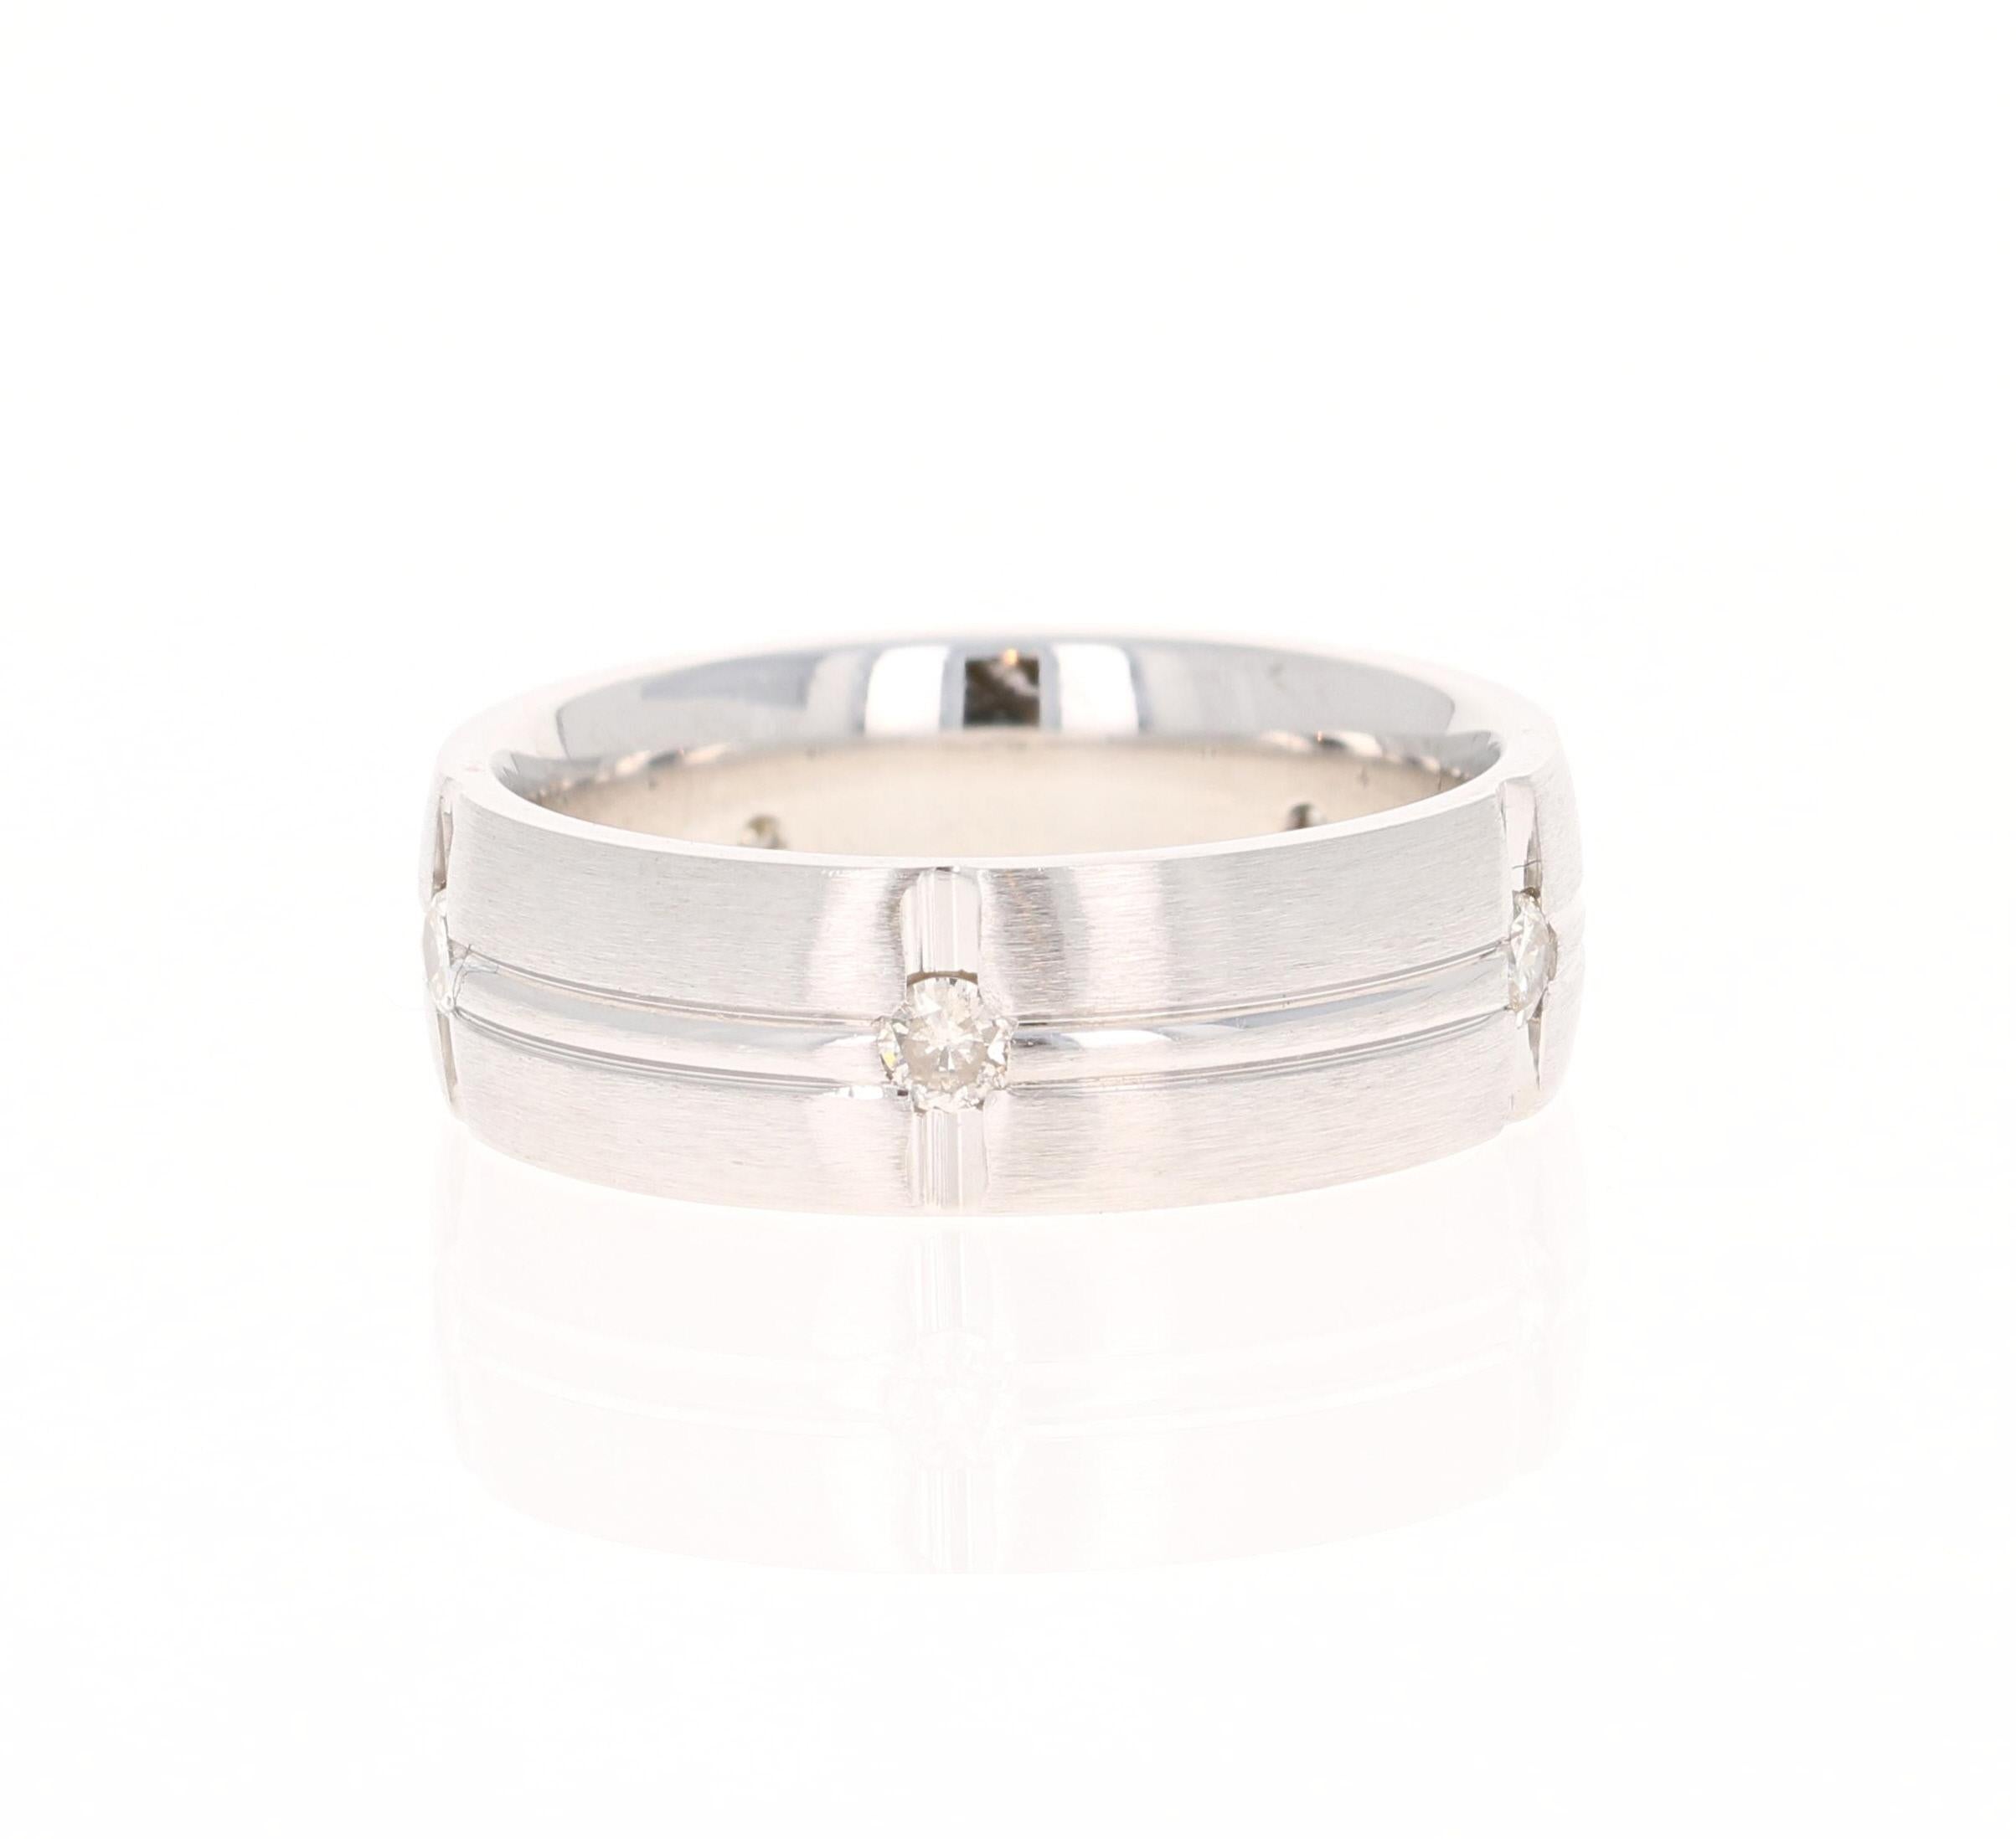 This ladies band has 6 Round Cut Natural Diamonds that weigh 0.30 carats. It is in 14 Karat White Gold and weighs 8.0 grams. 
The ring size is 7 and can be re-sized from sizes 6 - 8.5. 

